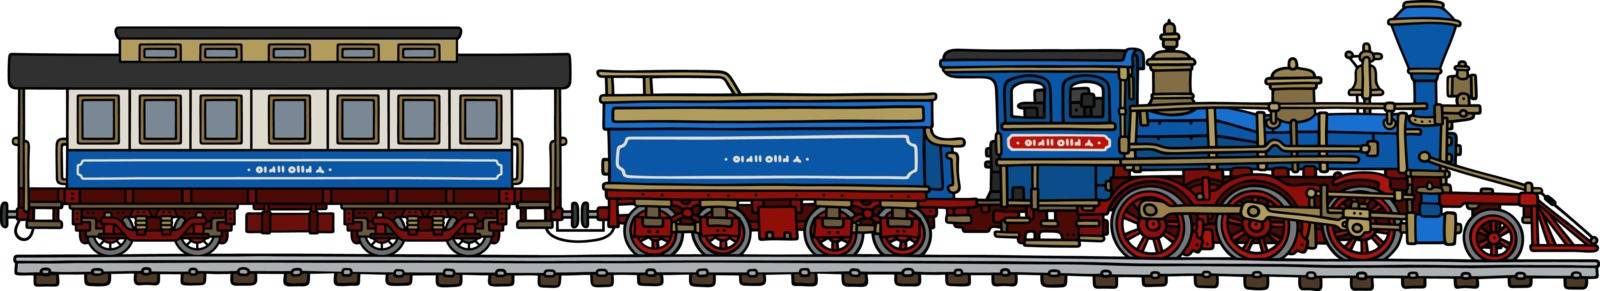 Hand drawing of a classic american steam train - not a real model